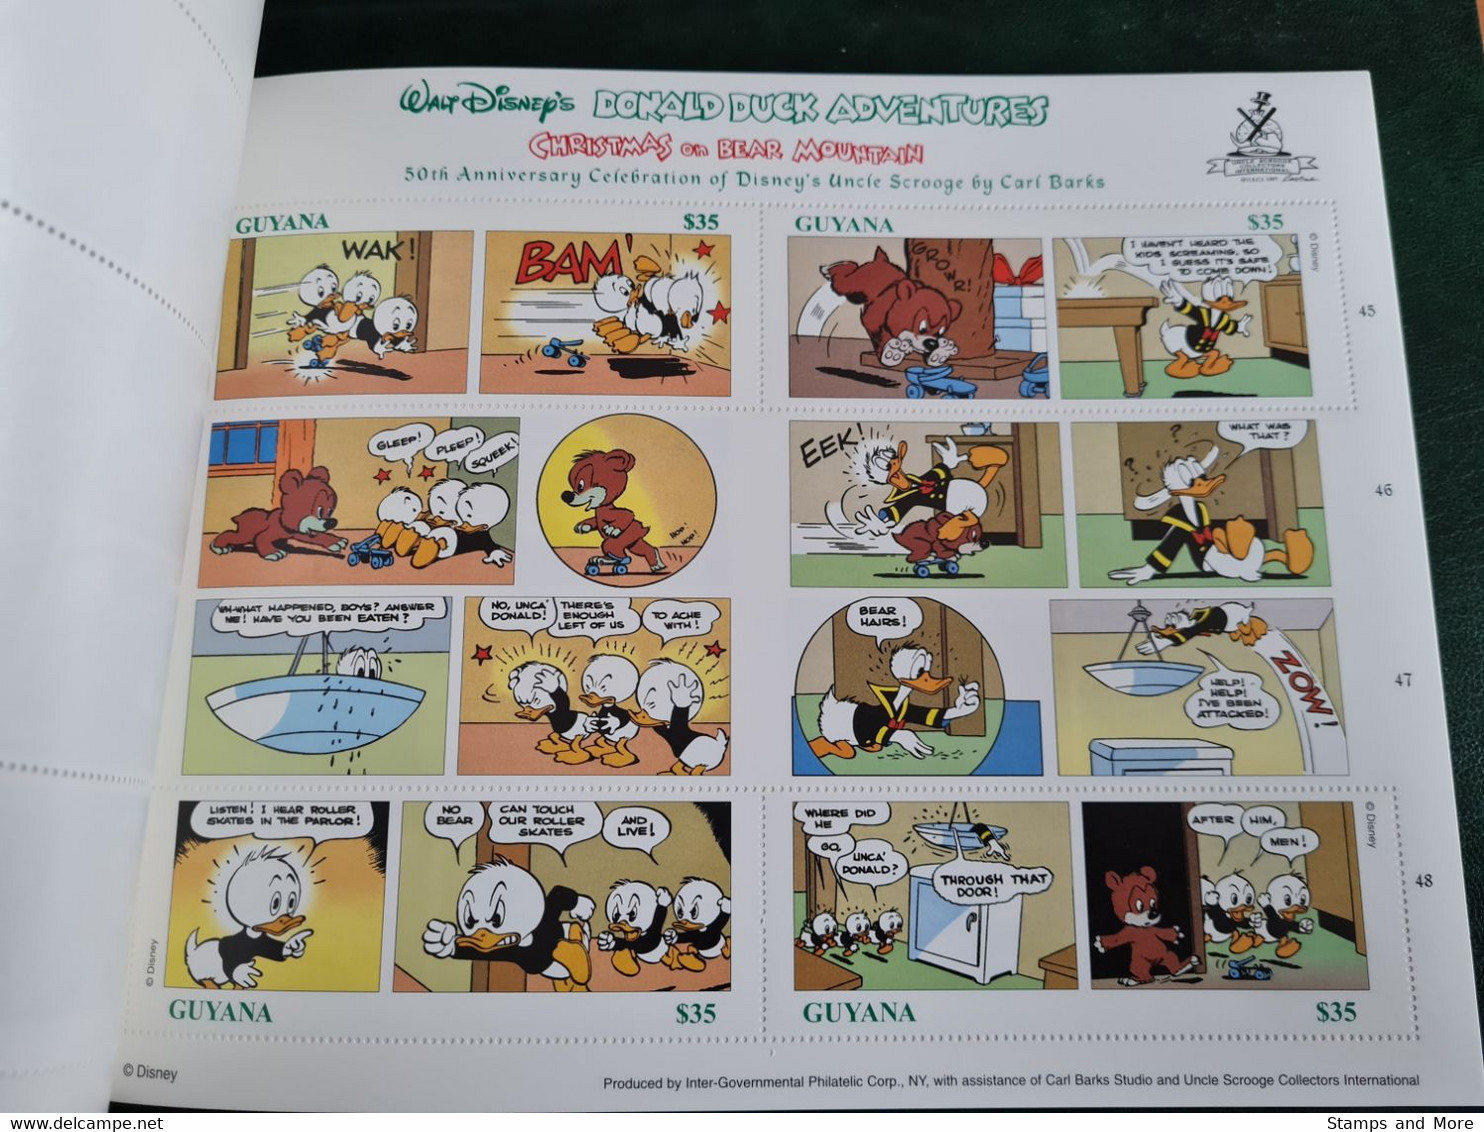 Guyana 1998 booklet with Mi 6249-6290 MNH FIRST DISNEY COMIC BOOK IN POSTAGE STAMPS